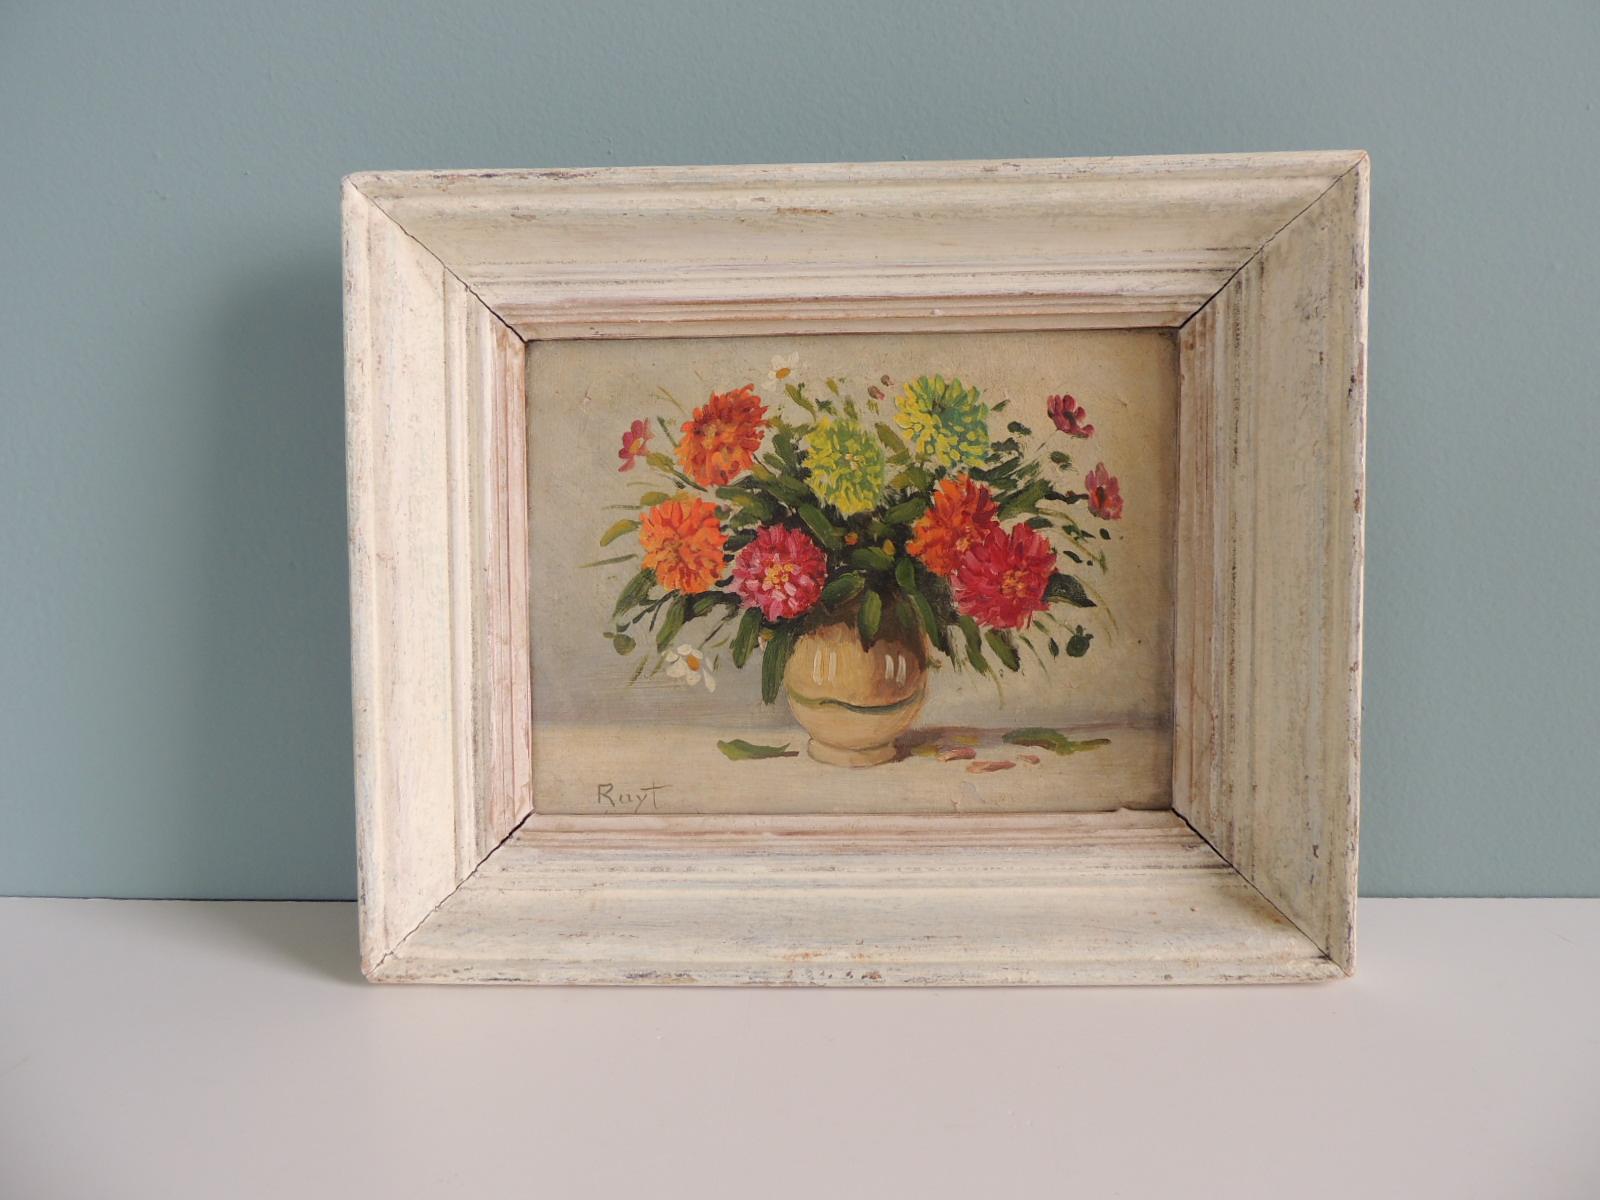 English watercolor of flower arrangement on a vase. Chalk paint wood frame.
Watercolor paint on a board.
Signed by Ray T.
Painted wood frame size: 7 x 9 x 0.25.